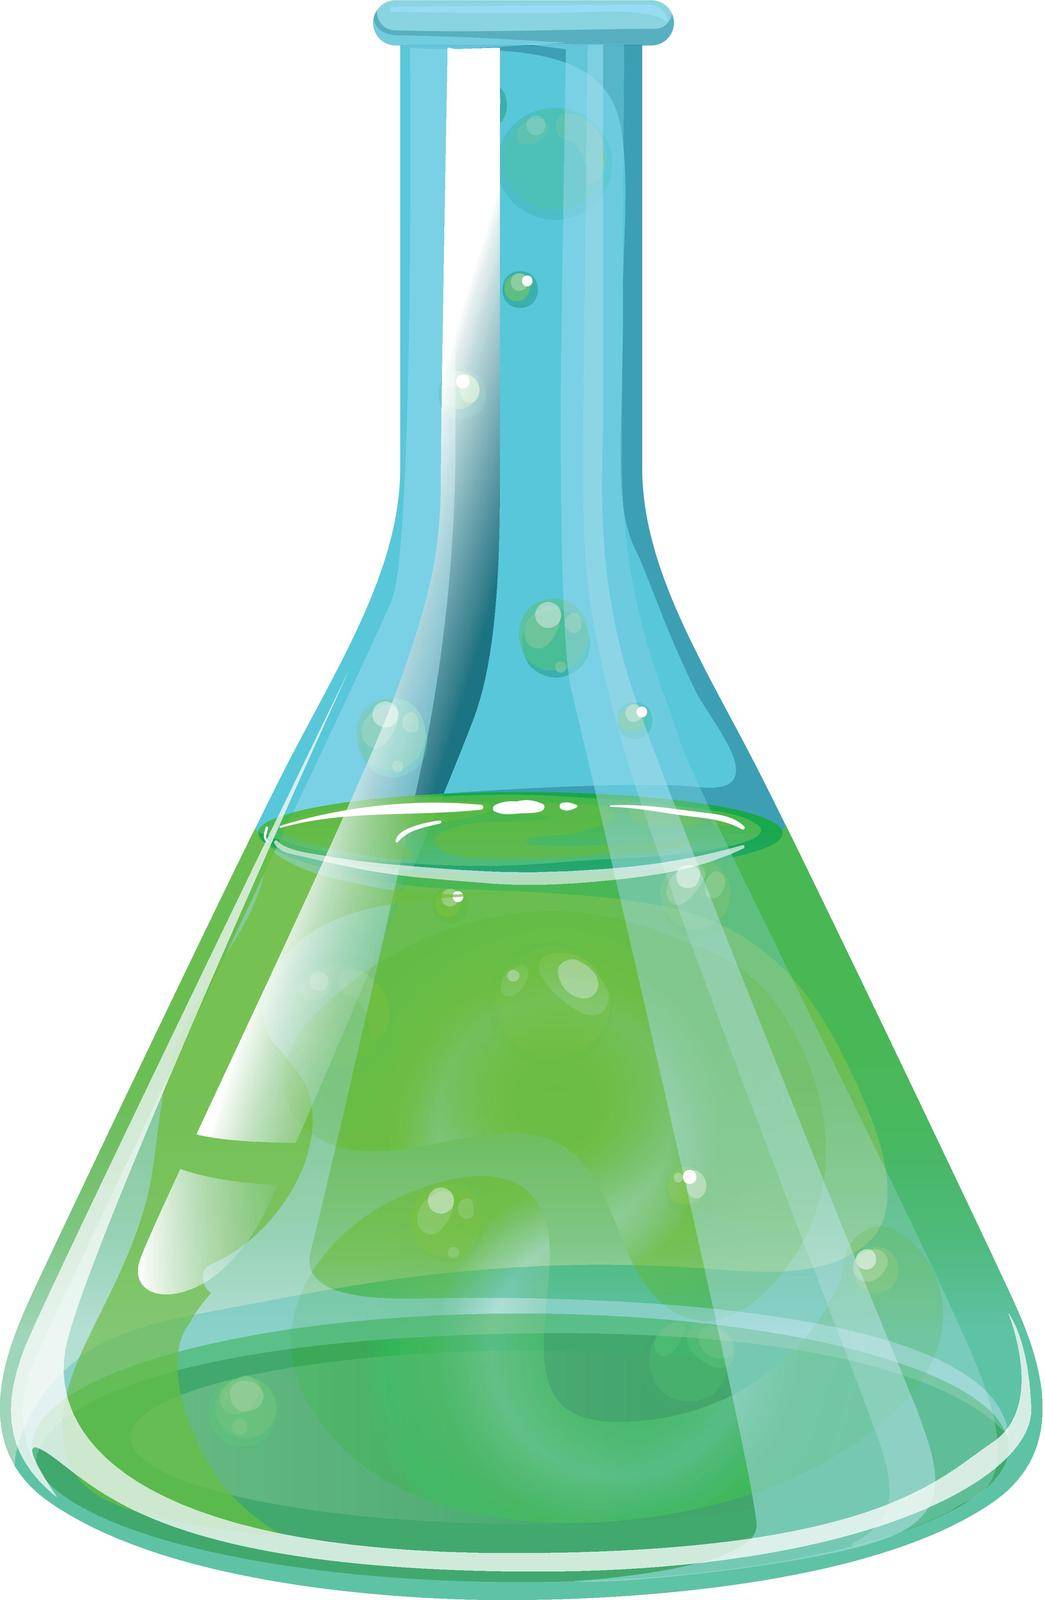 A laboratory flask by iimages